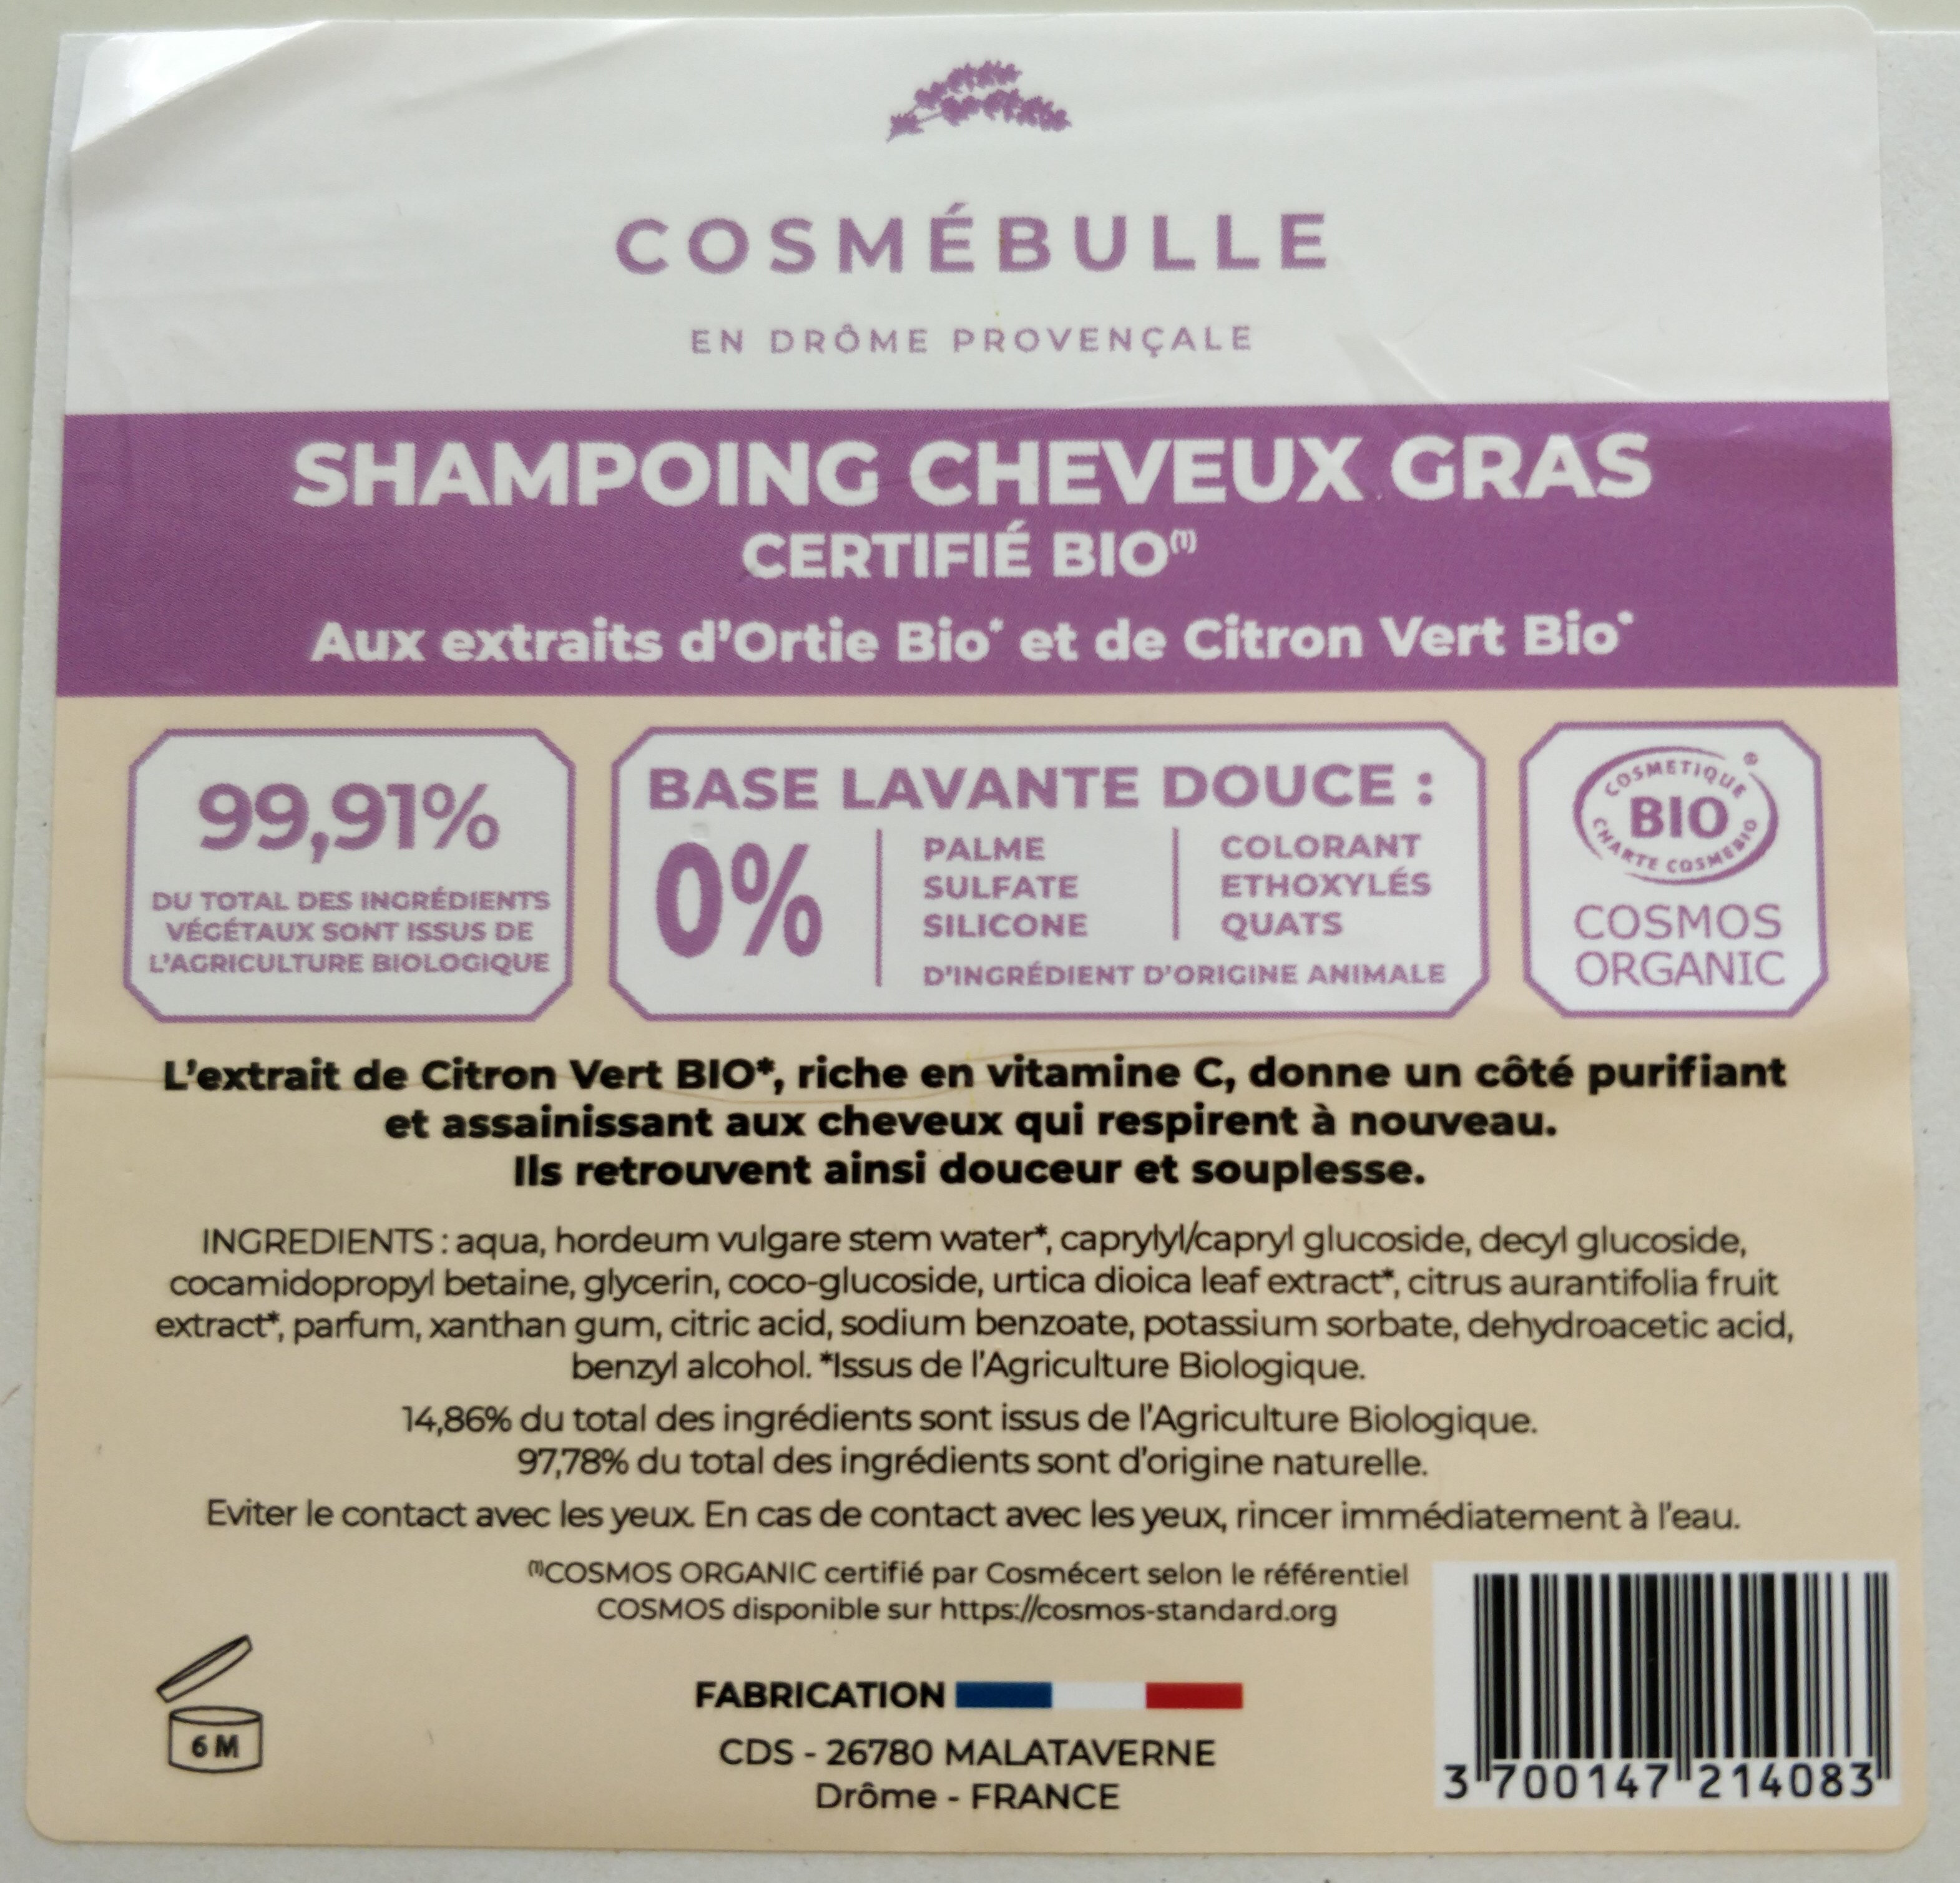 Shampoing cheveux gras - Product - fr